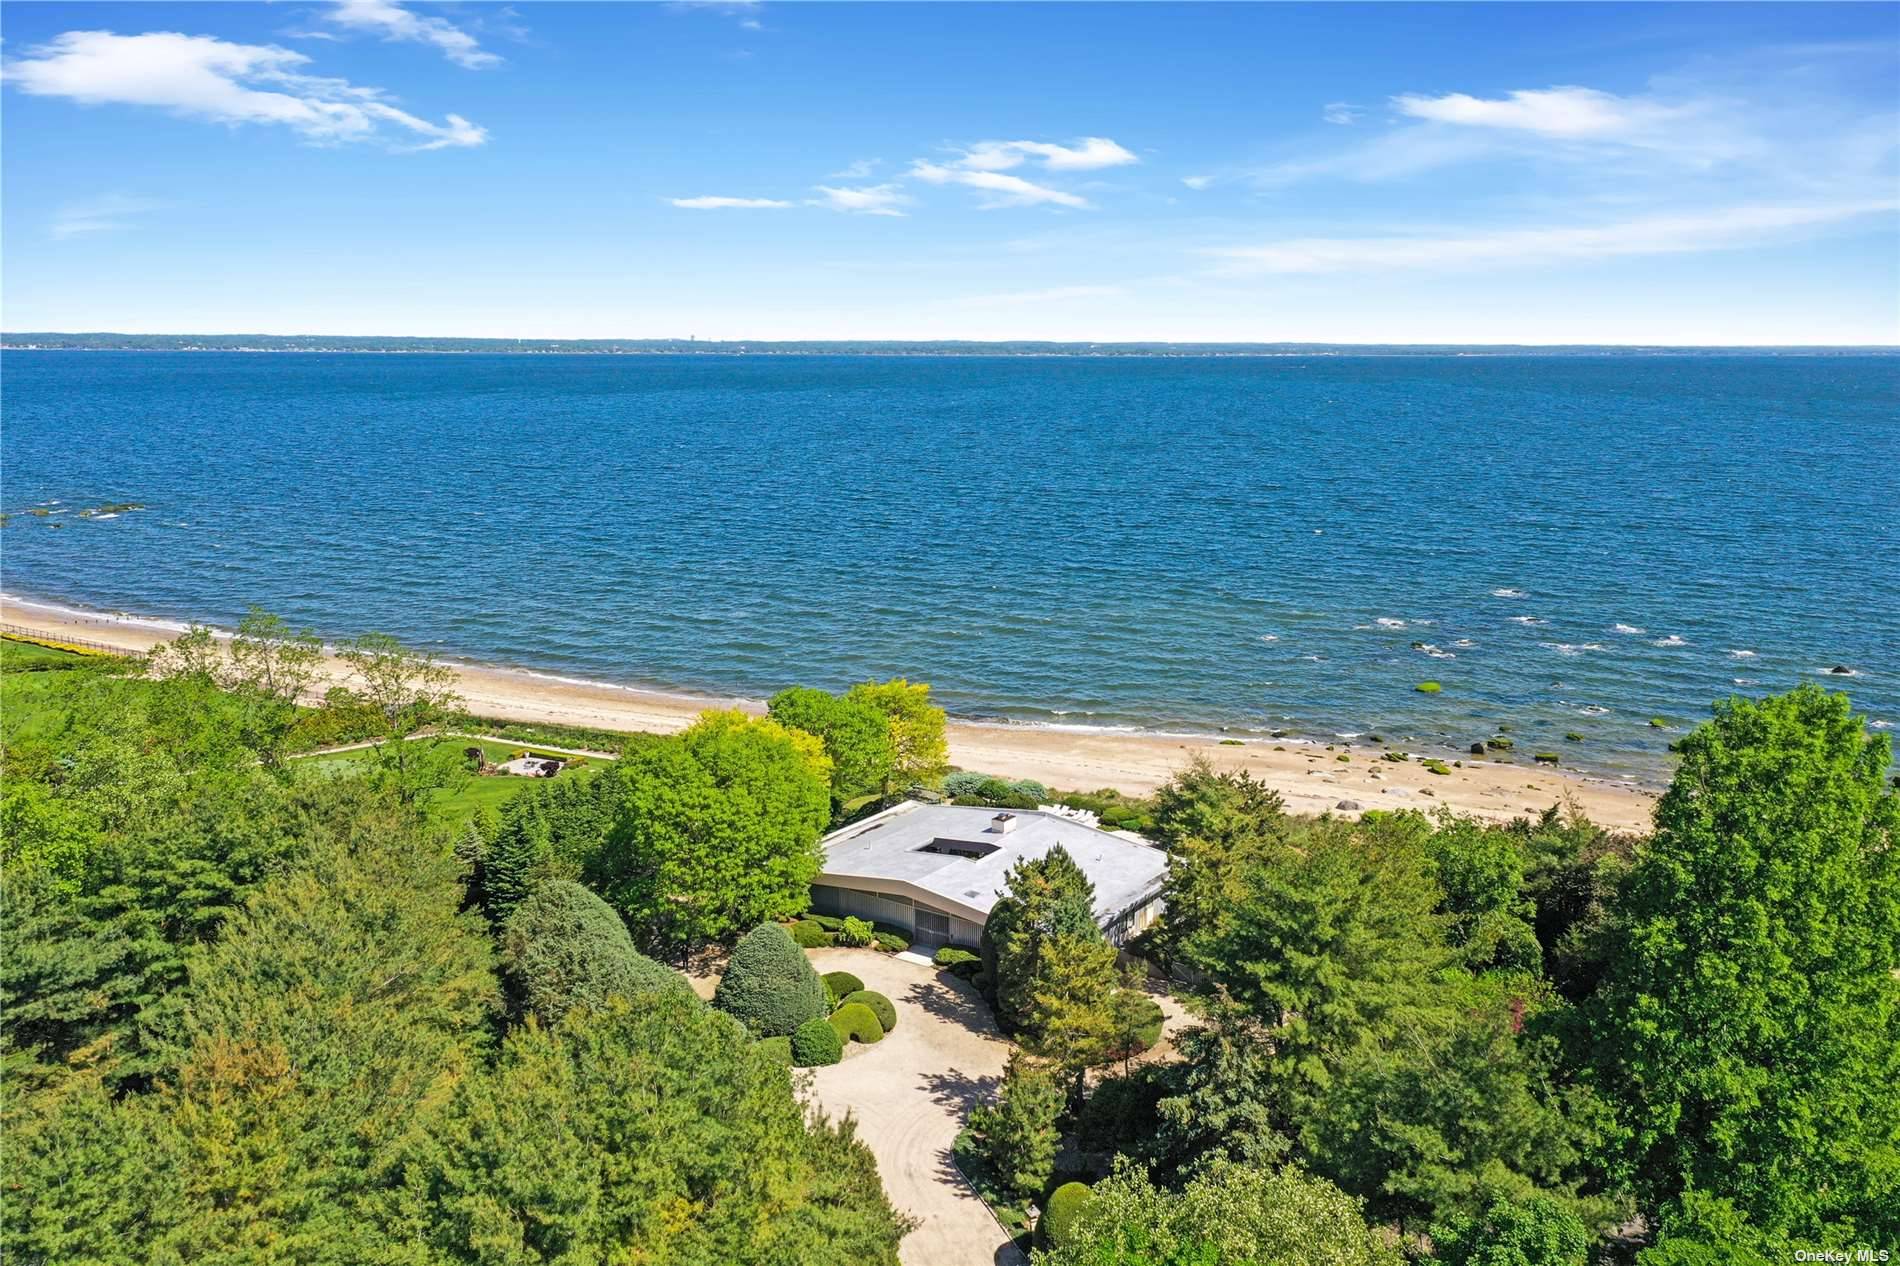 Serenity by the Sound. This beach house sits on over 2 acres, and is right on Long Island Sound.